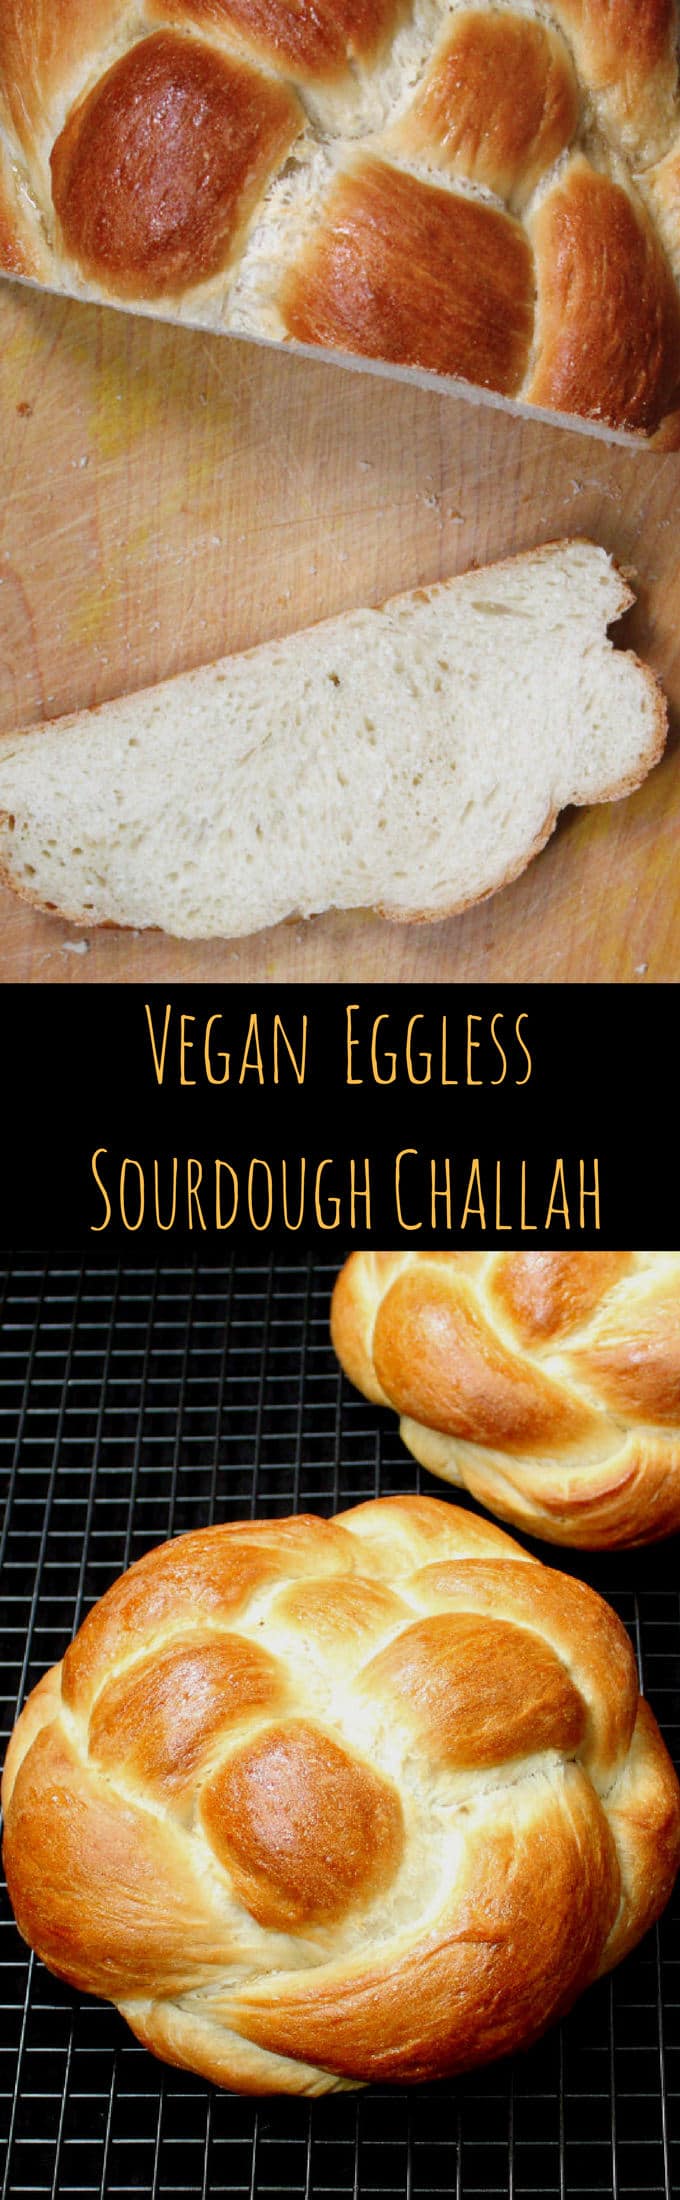 Challah images with text inlay that says "vegan eggless sourdough challah"